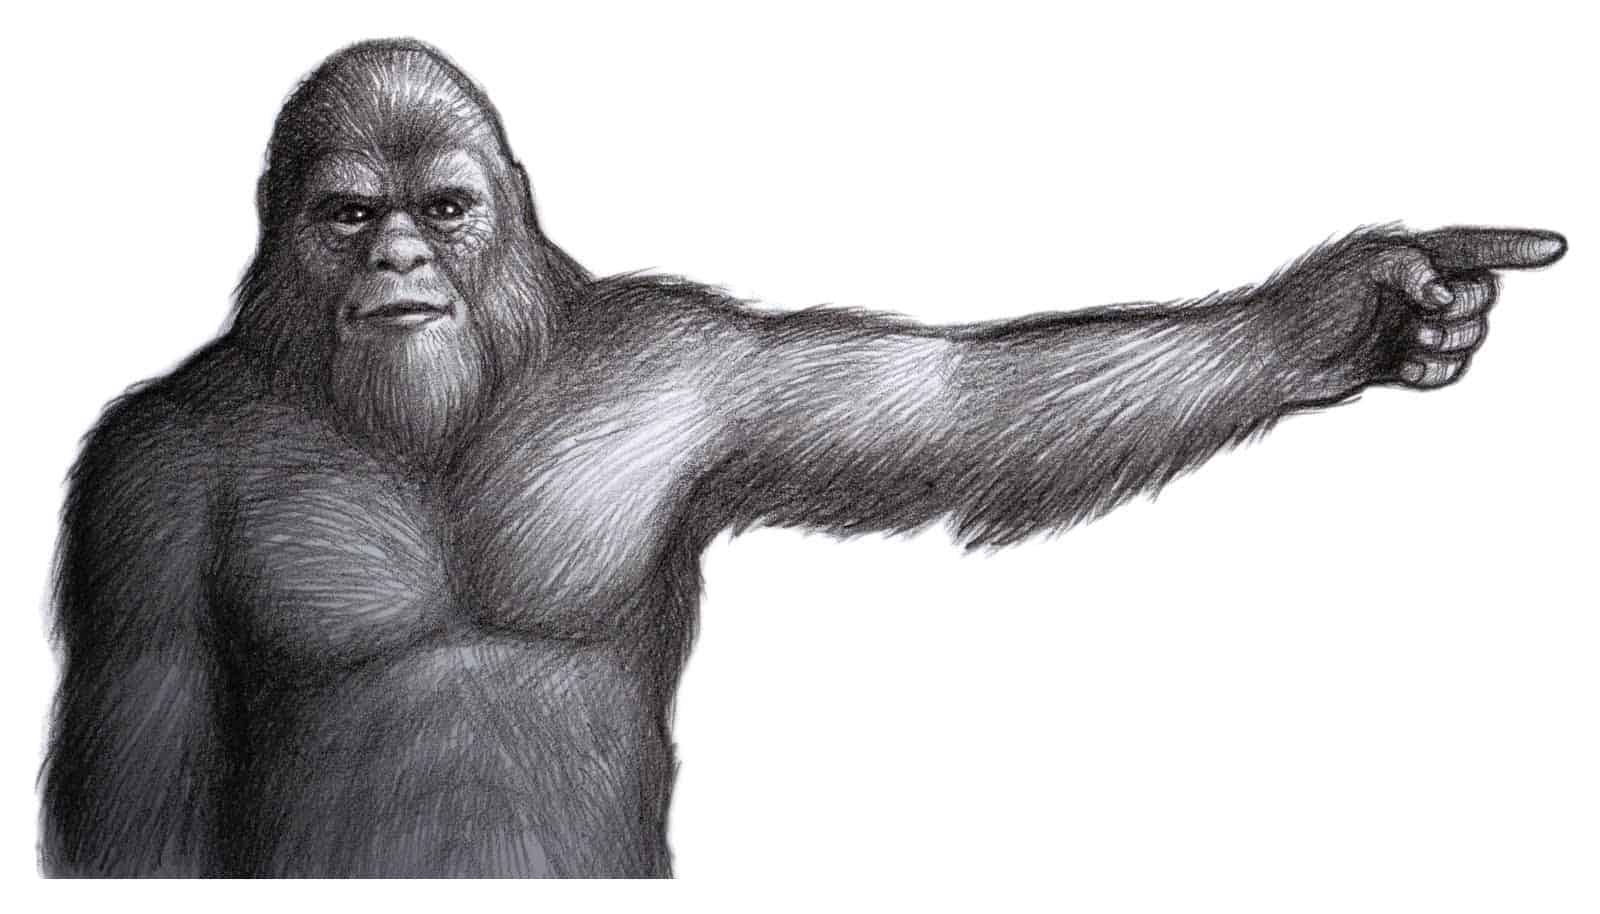 Is Sasquatch Too Controversial For Science? What Happens When Scientists Toe the Bigfoot Line